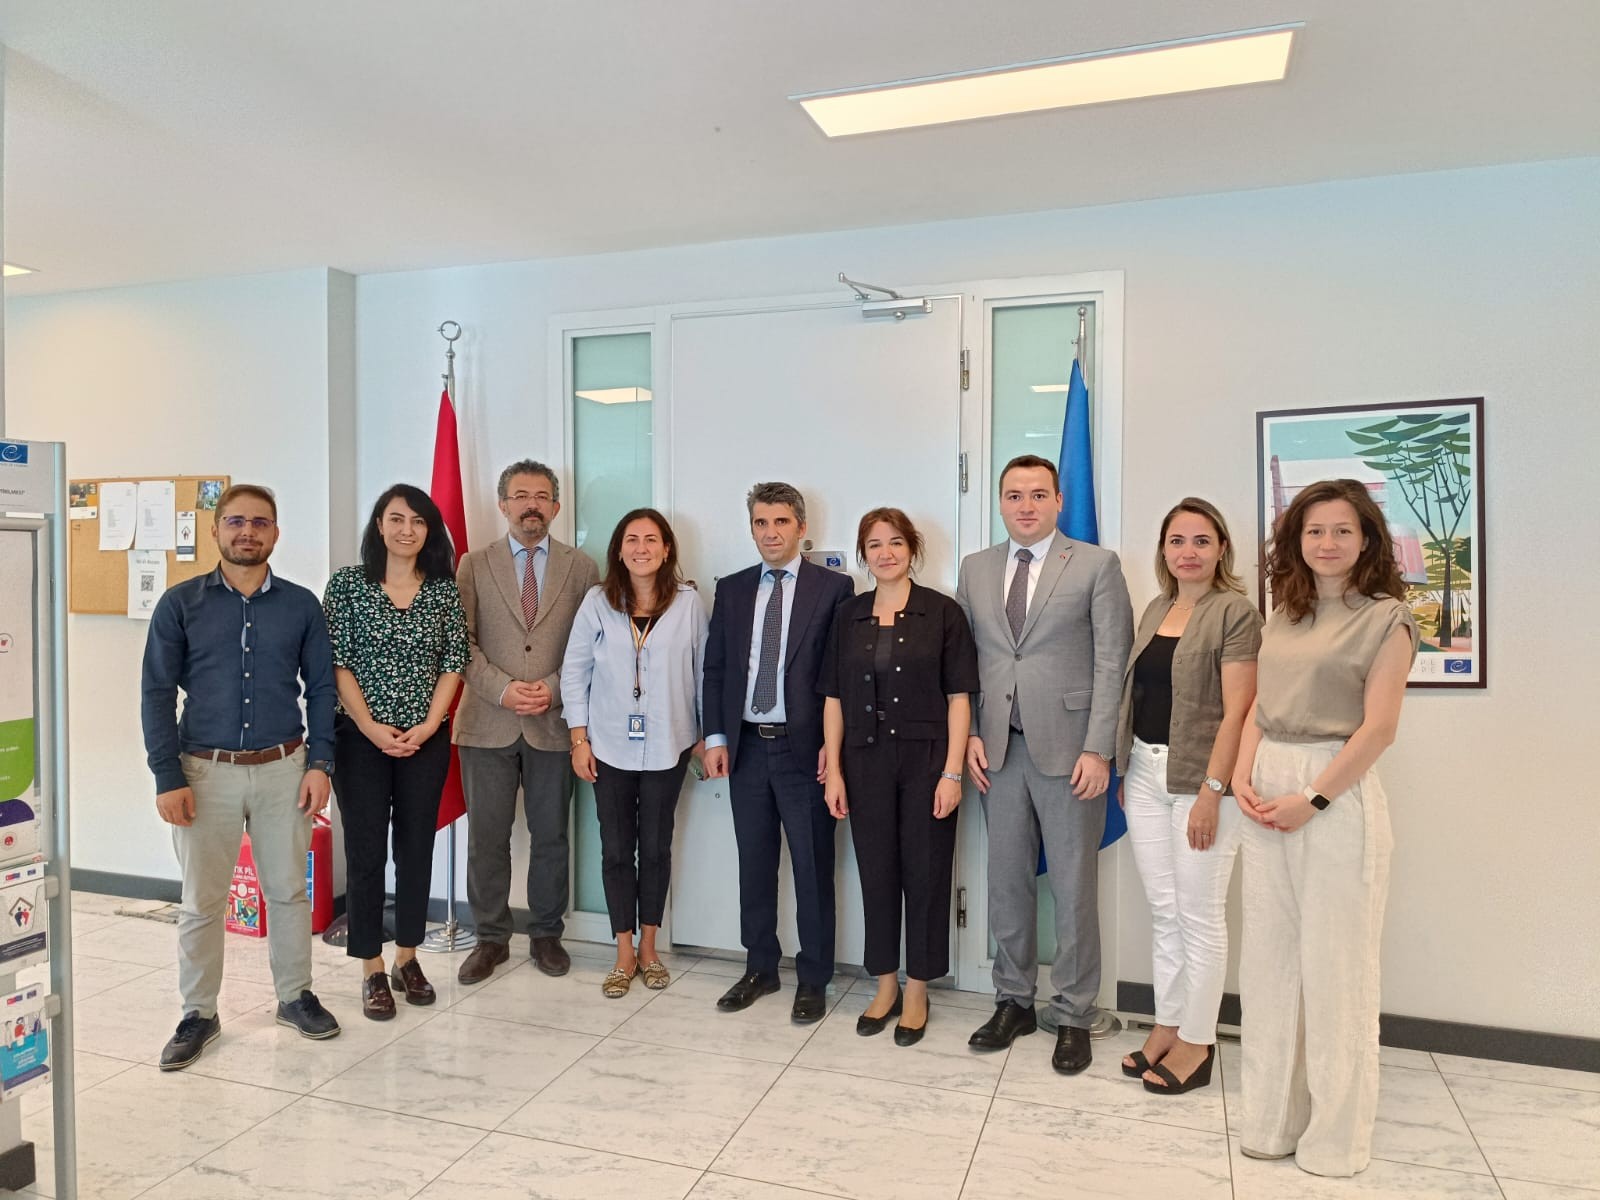 Co-ordination Meeting was Held for the European Union-Council of Europe Joint Project on “Promoting Alternative Dispute Resolution (ADR) in Turkey”